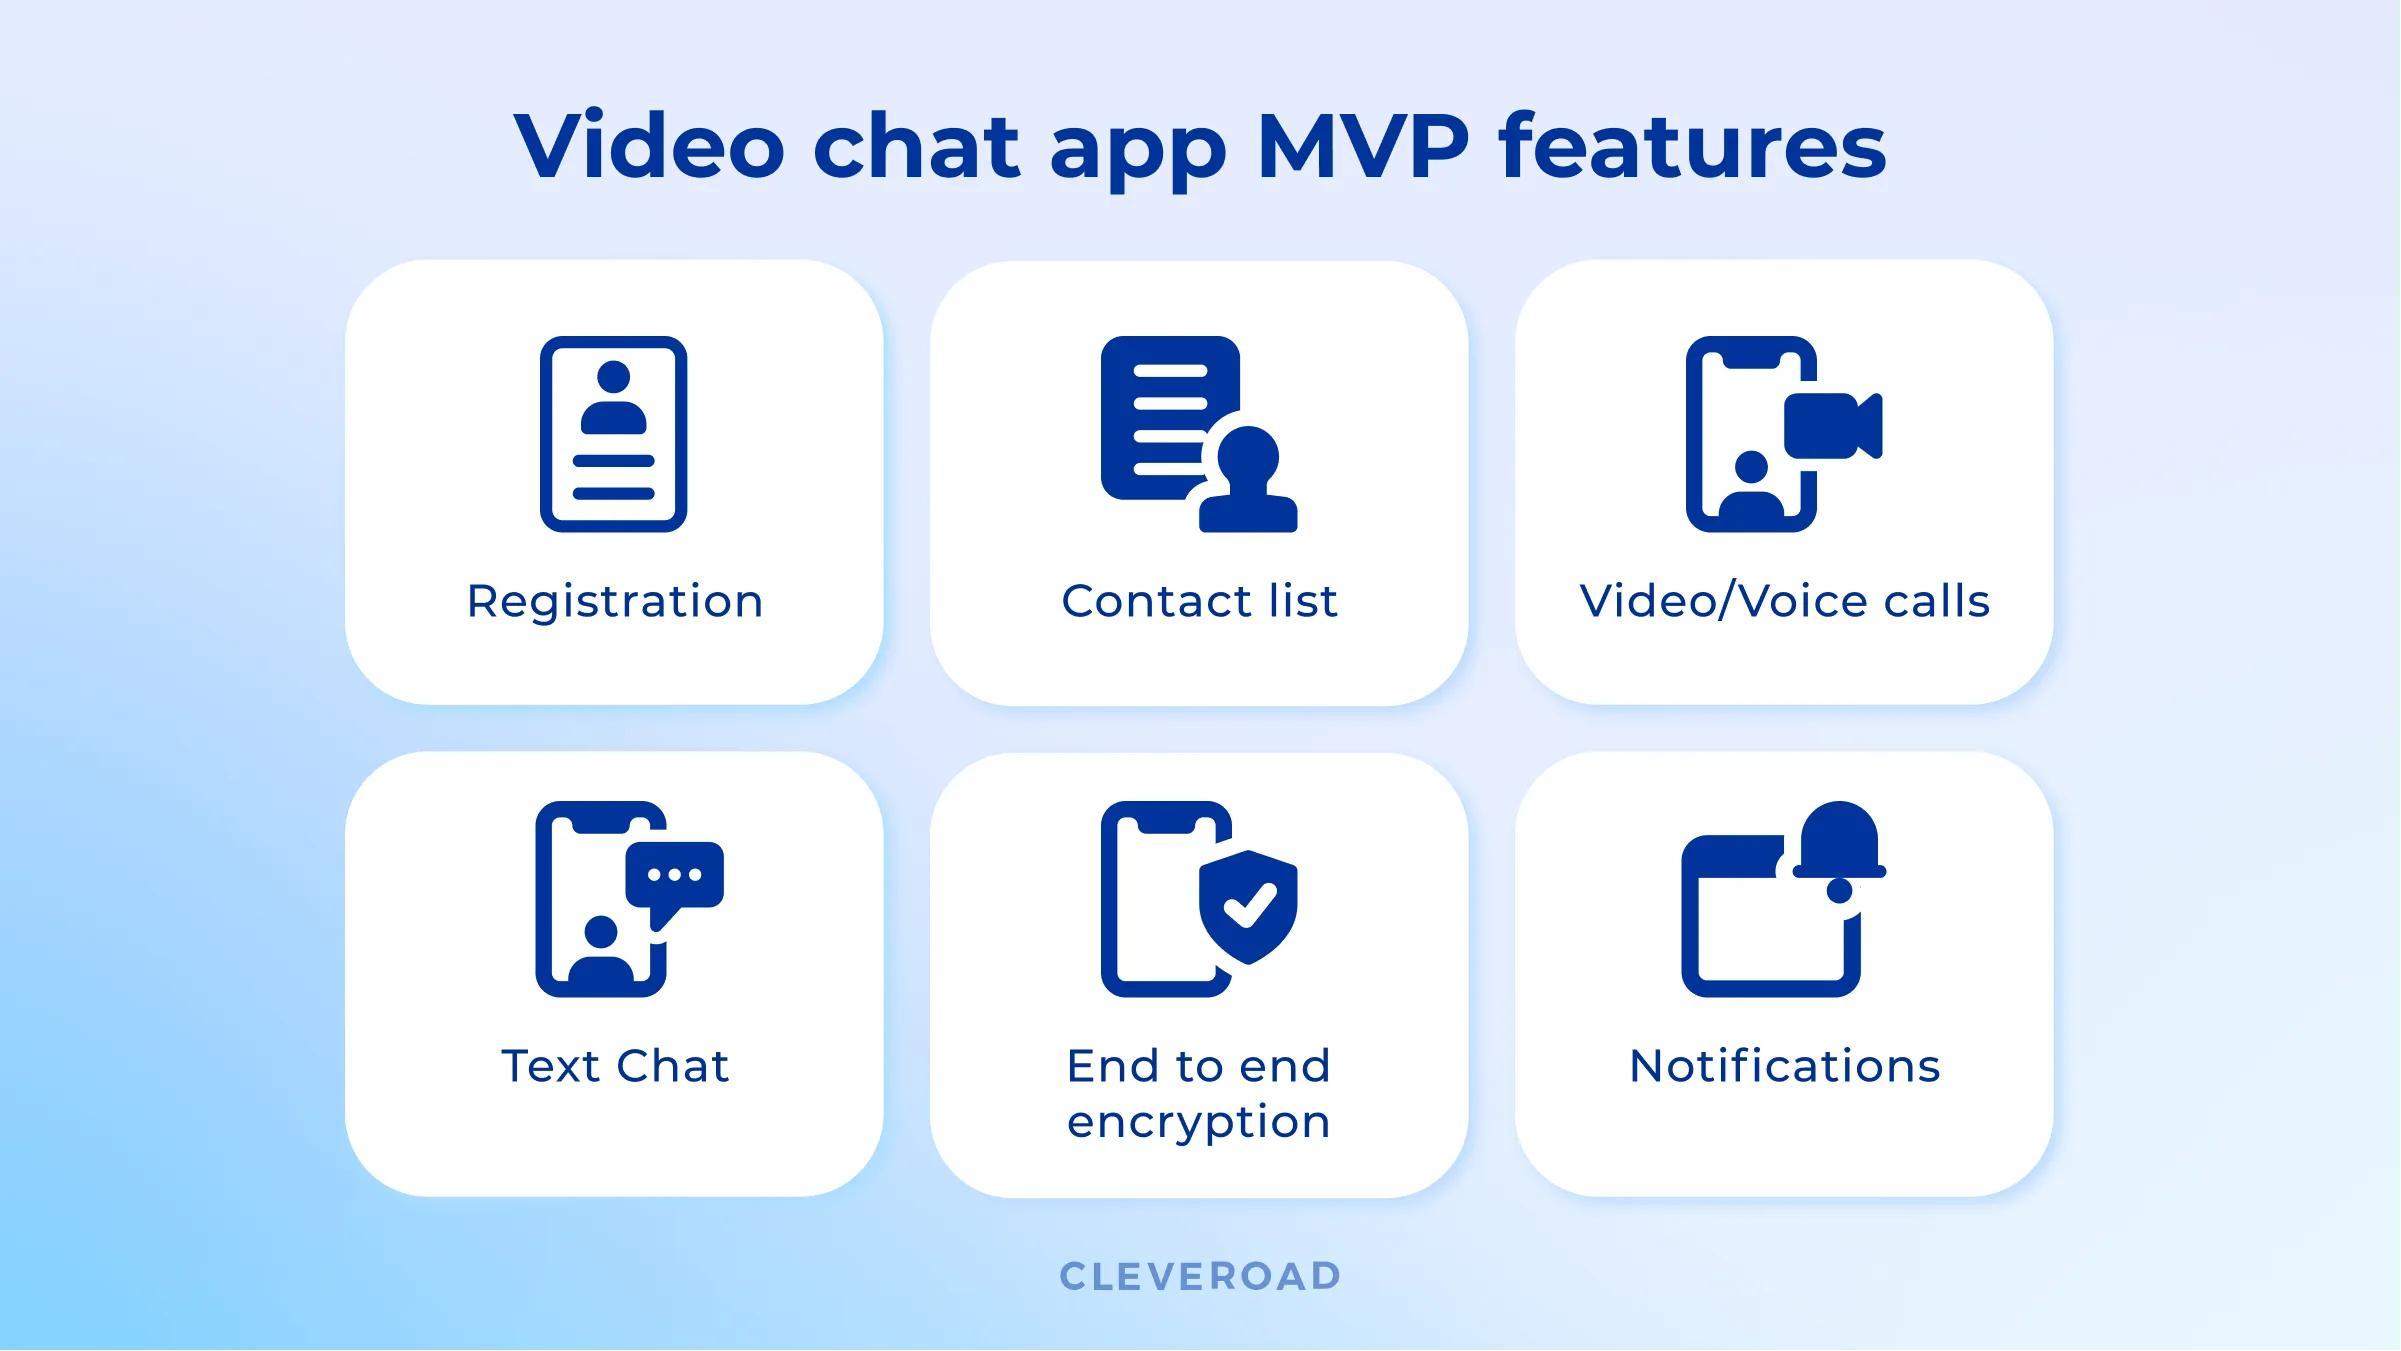 How to build a video chat app MVP?